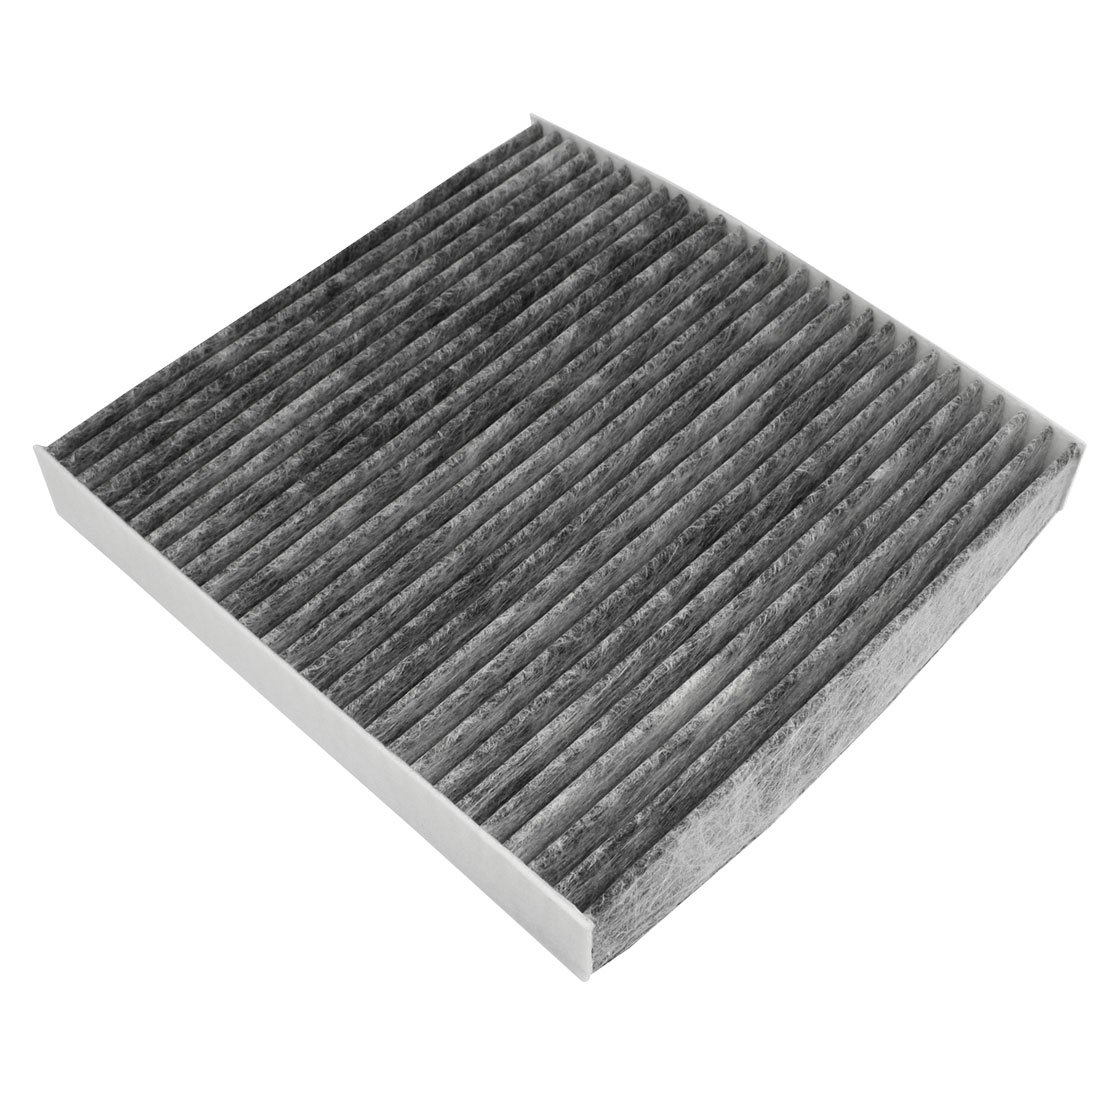  OEM 27277-4m400 High Quality NISSAN Activated Carbon Cabin Filter 